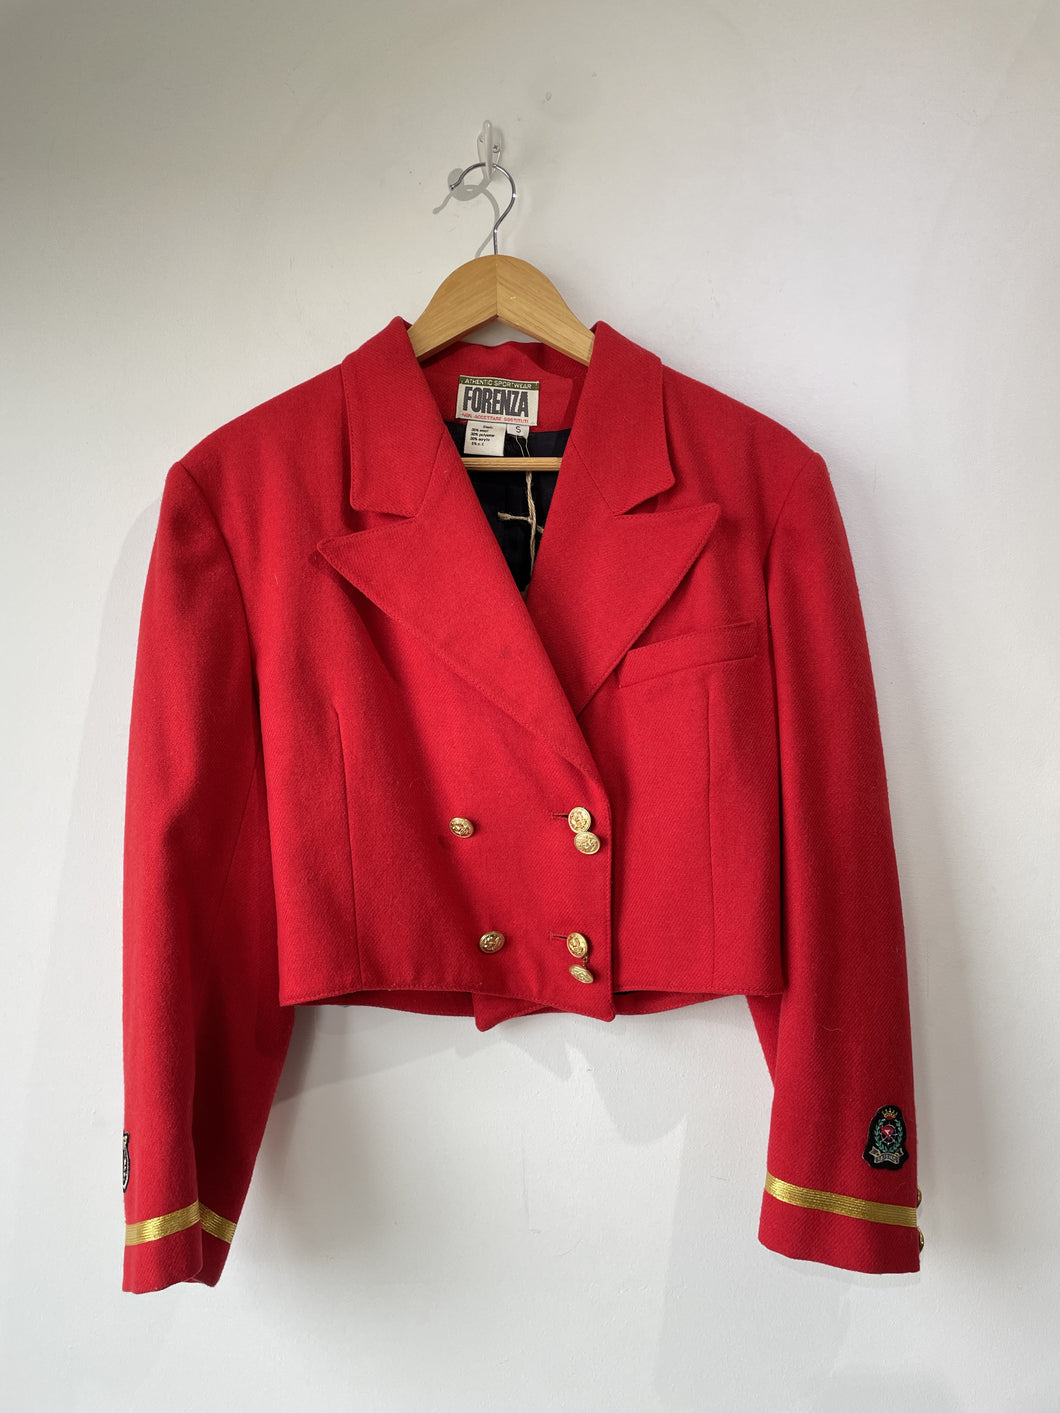 Vintage Forenza Red Cropped Suit Jacket